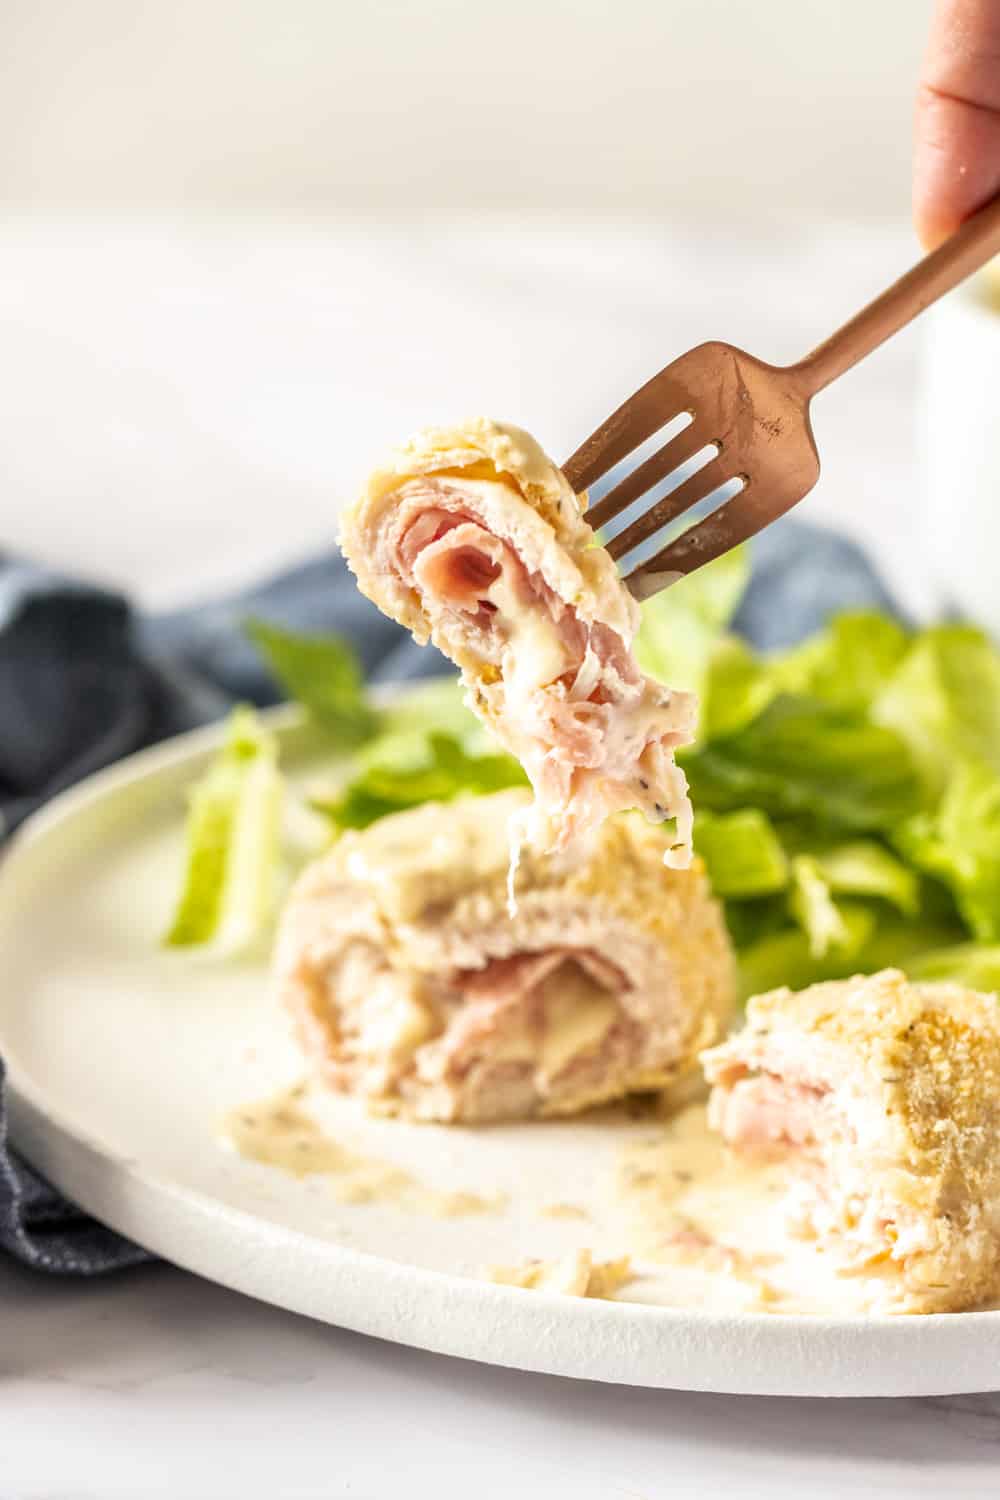 Chicken cordon bleu on a fork shows the inner layers.